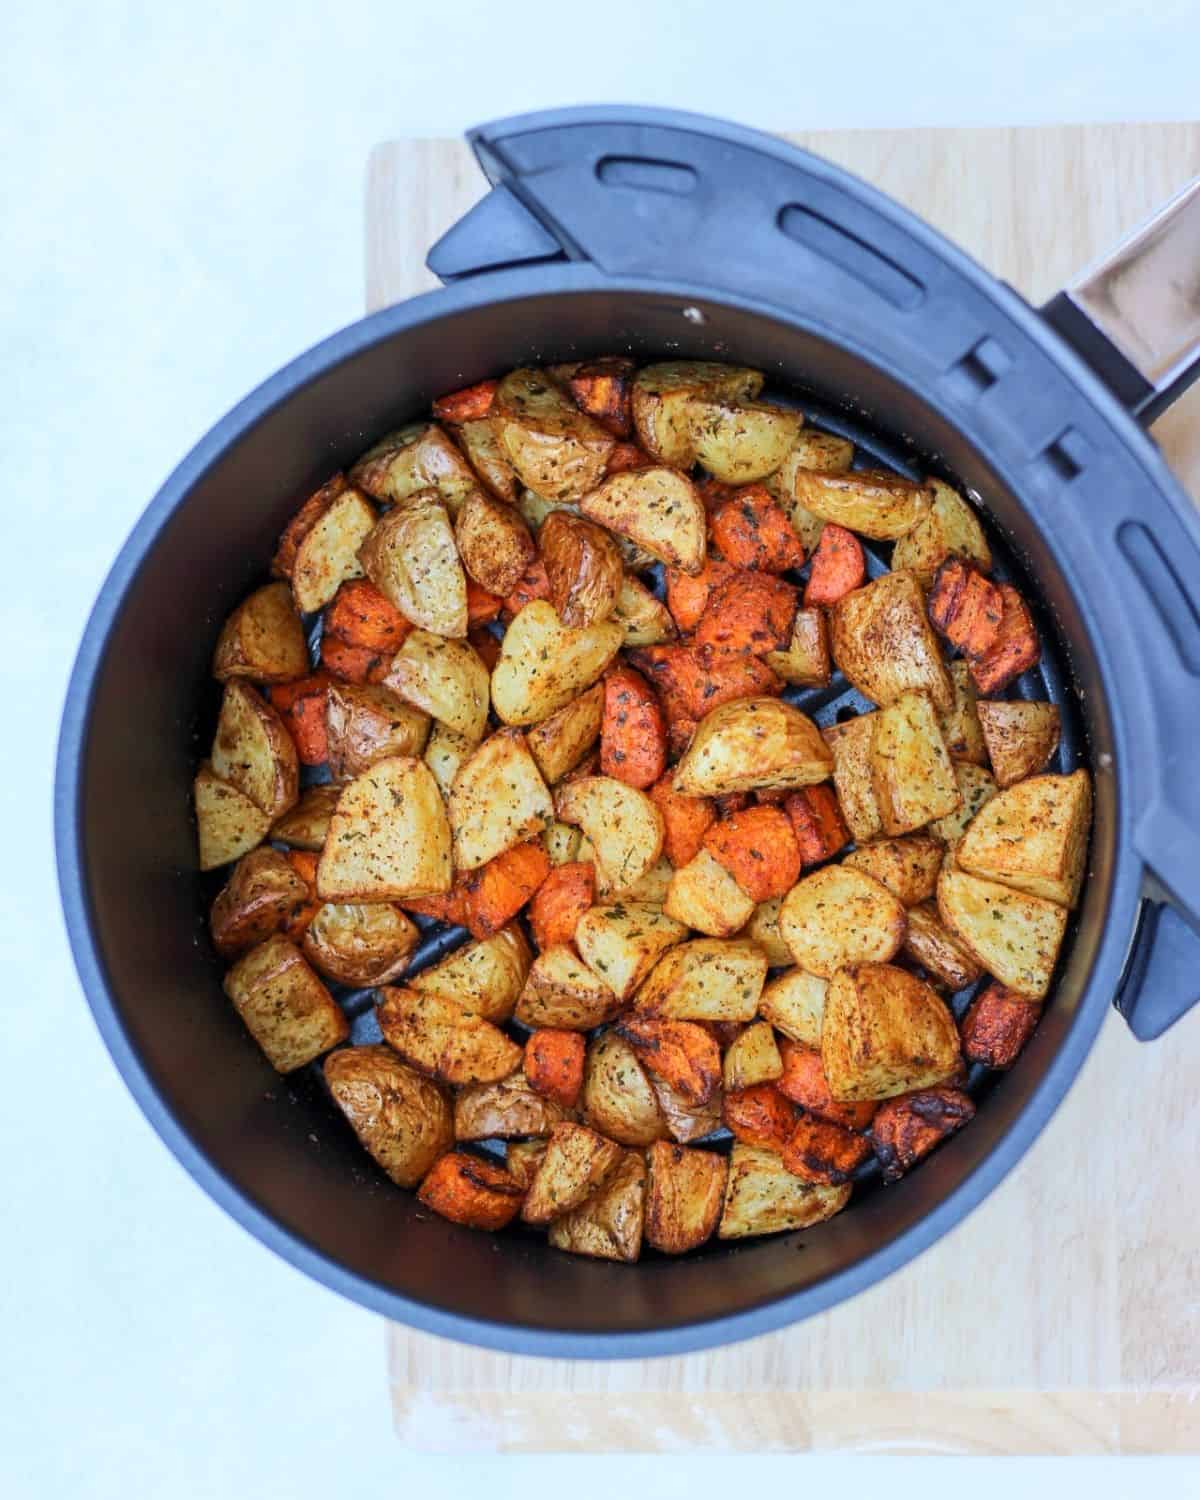 Cooked rir fyer carrots and potatoes in a round airfyer basket.